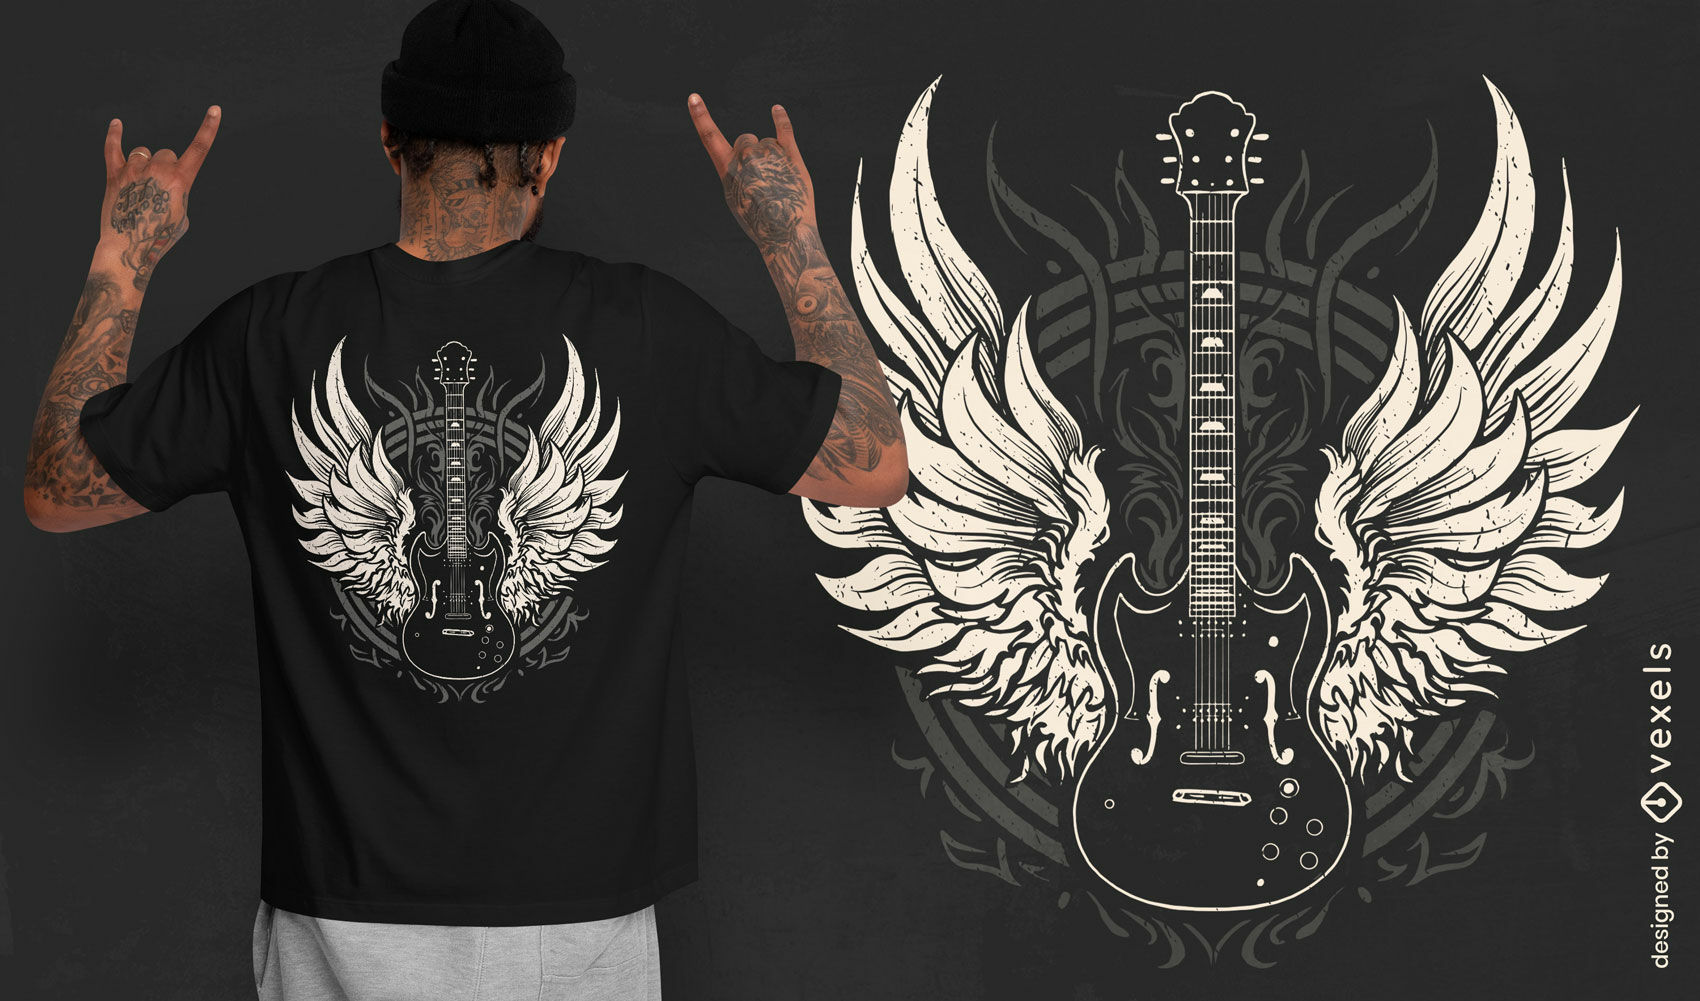 Rock and roll electric guitar t-shirt design